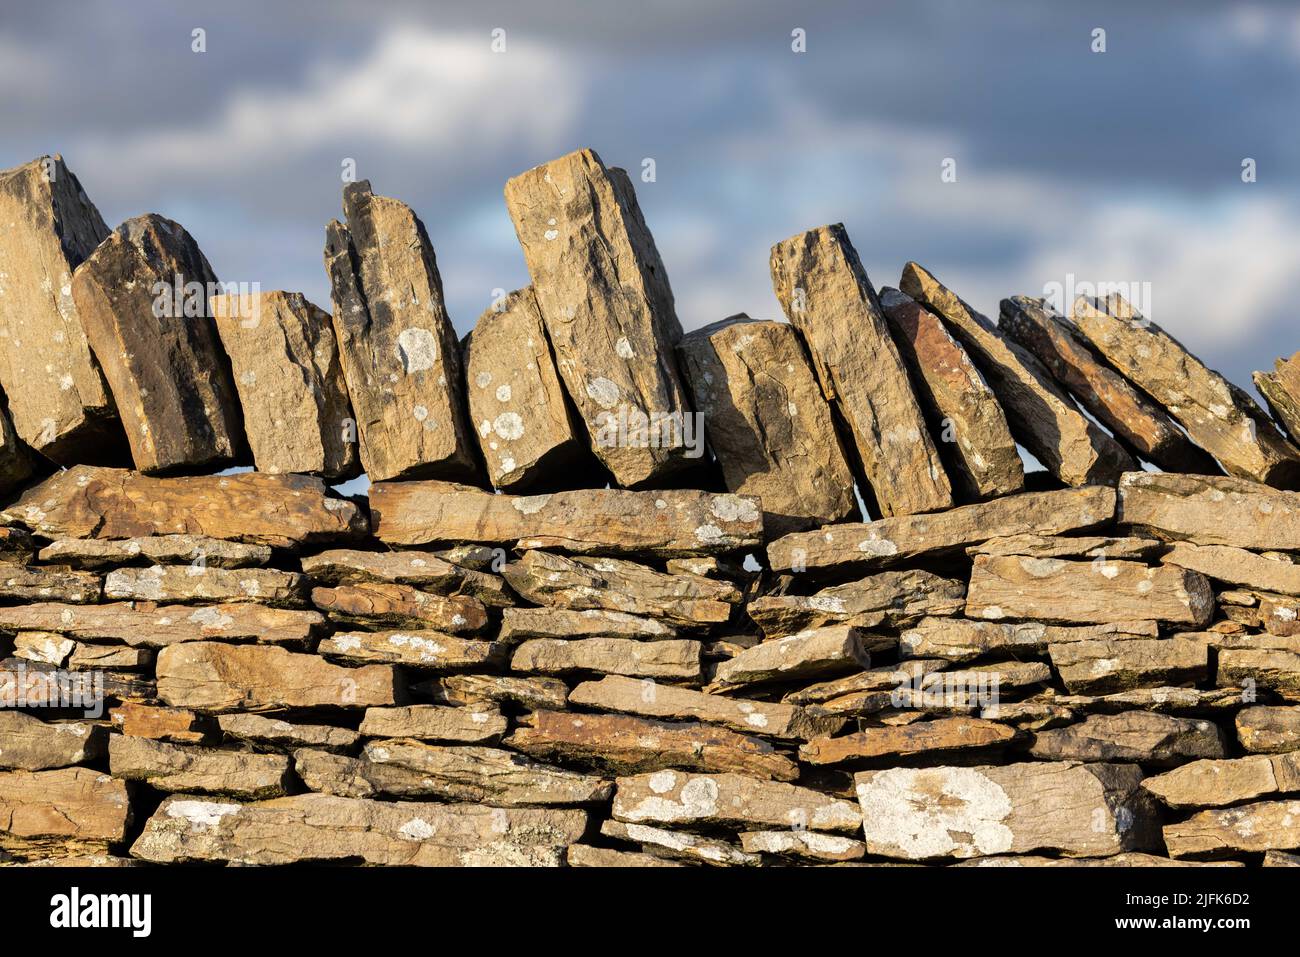 Dry stone wall in Burnley. Stock Photo